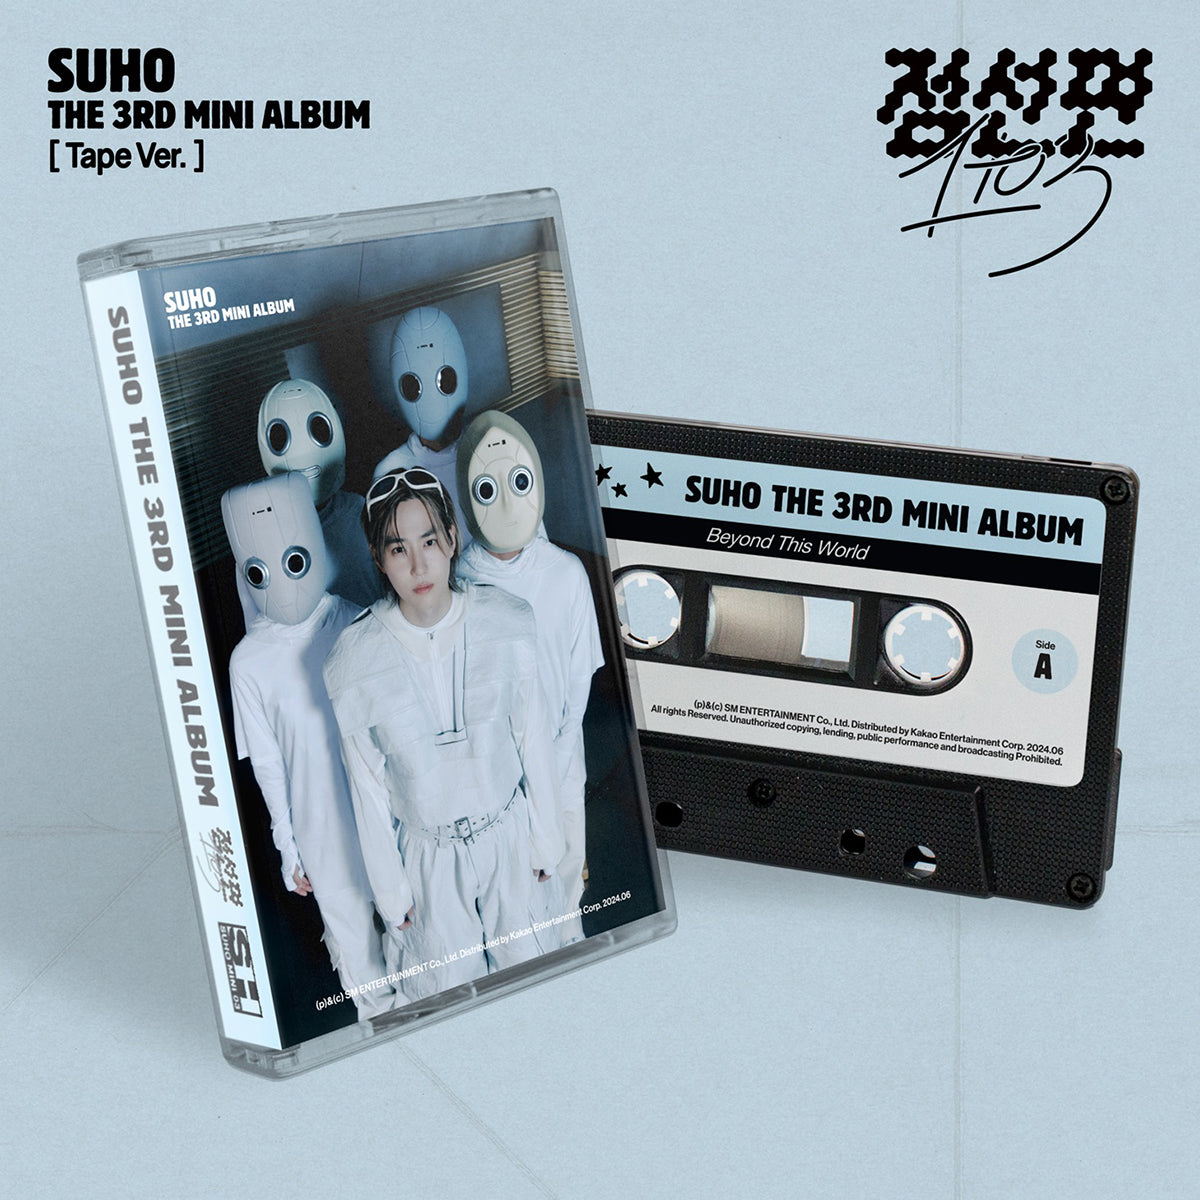 SUHO (EXO) - 1 to 3 (Tape Ver.)